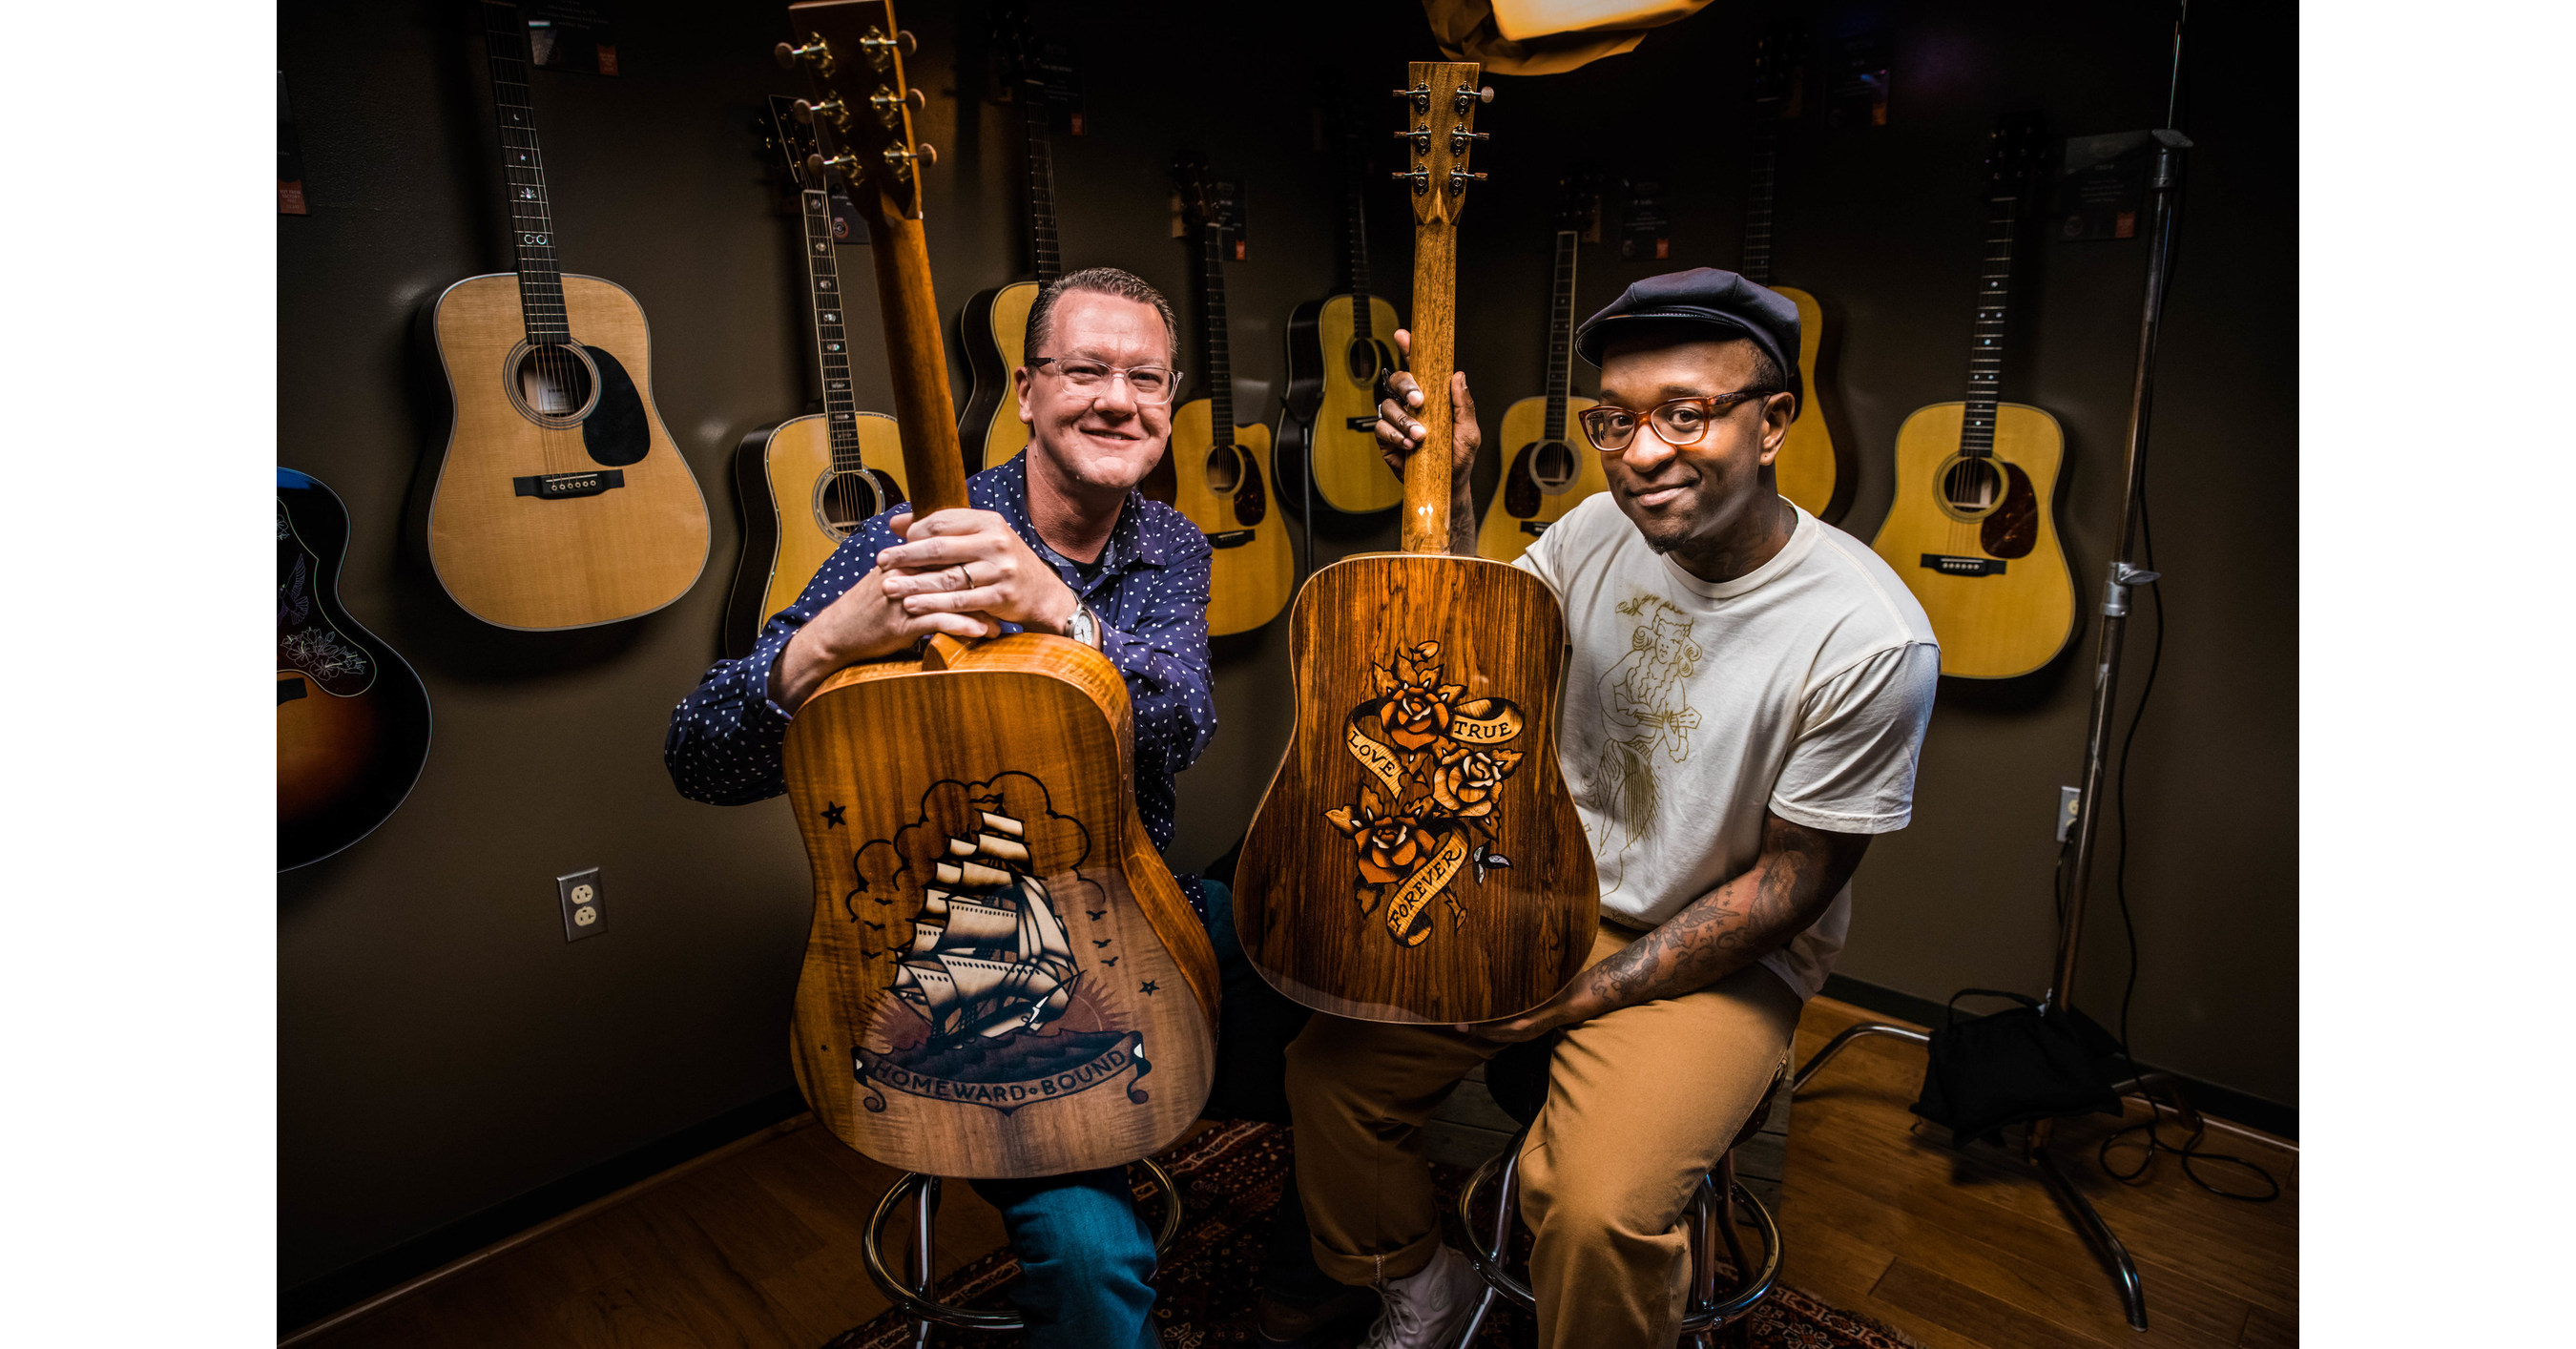 . Martin & Co.® Celebrates Sailor Jerry Spiced Rum's Namesake Norman  Collins With Ink & Wood special Edition Guitar Series